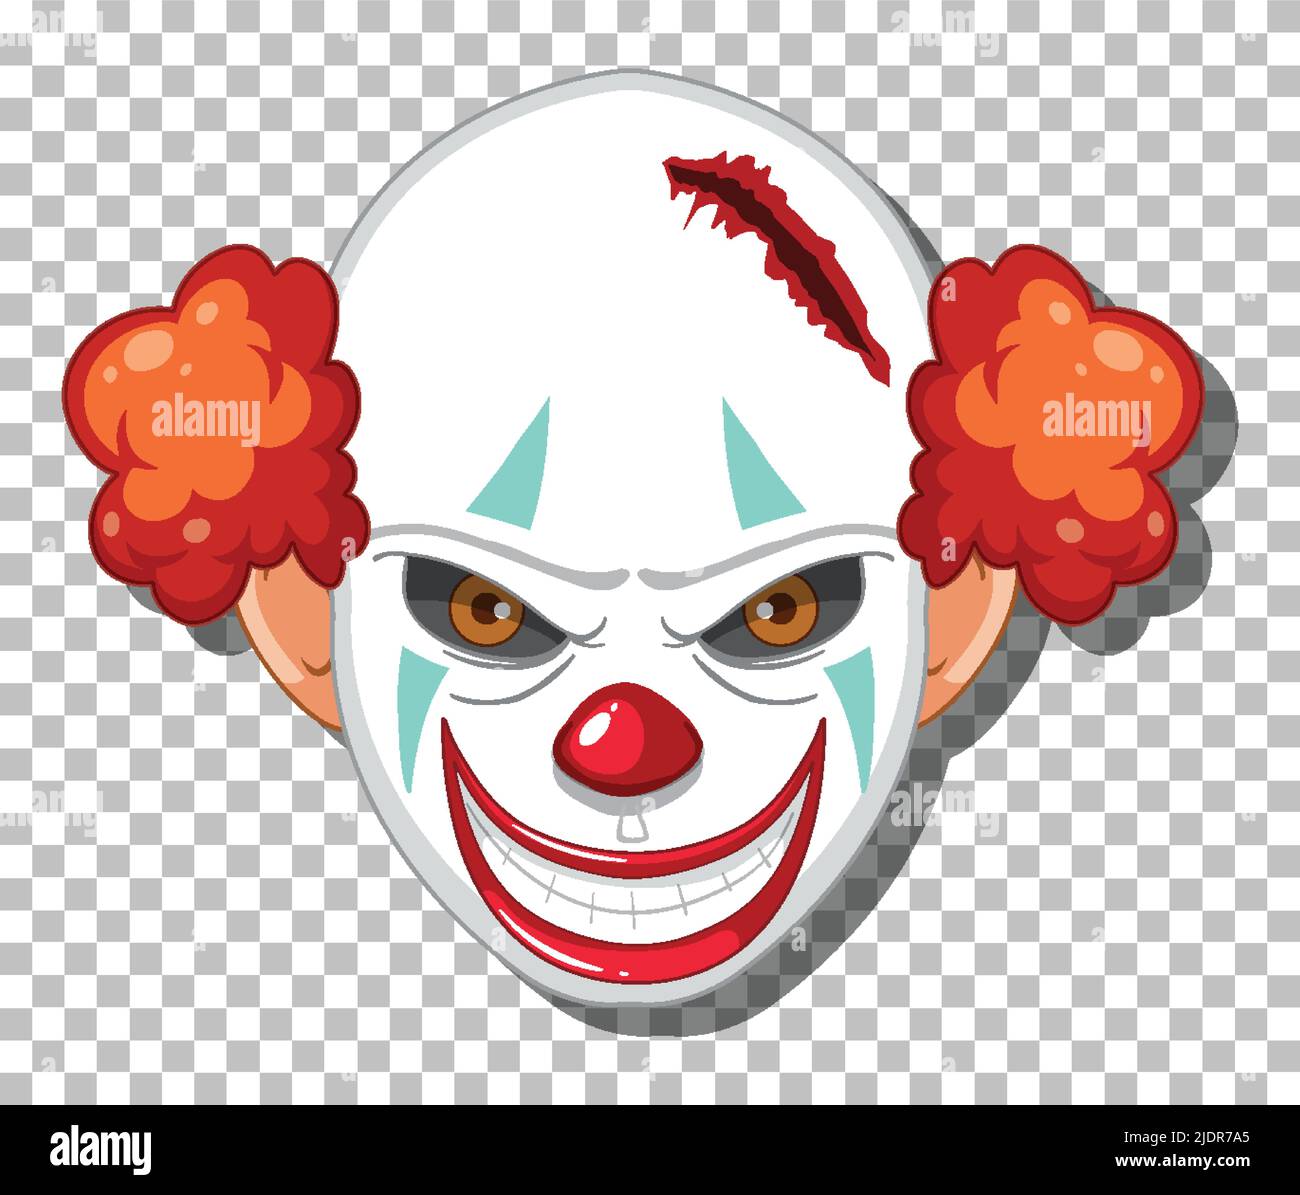 Scary clown head on grid background illustration Stock Vector Image ...